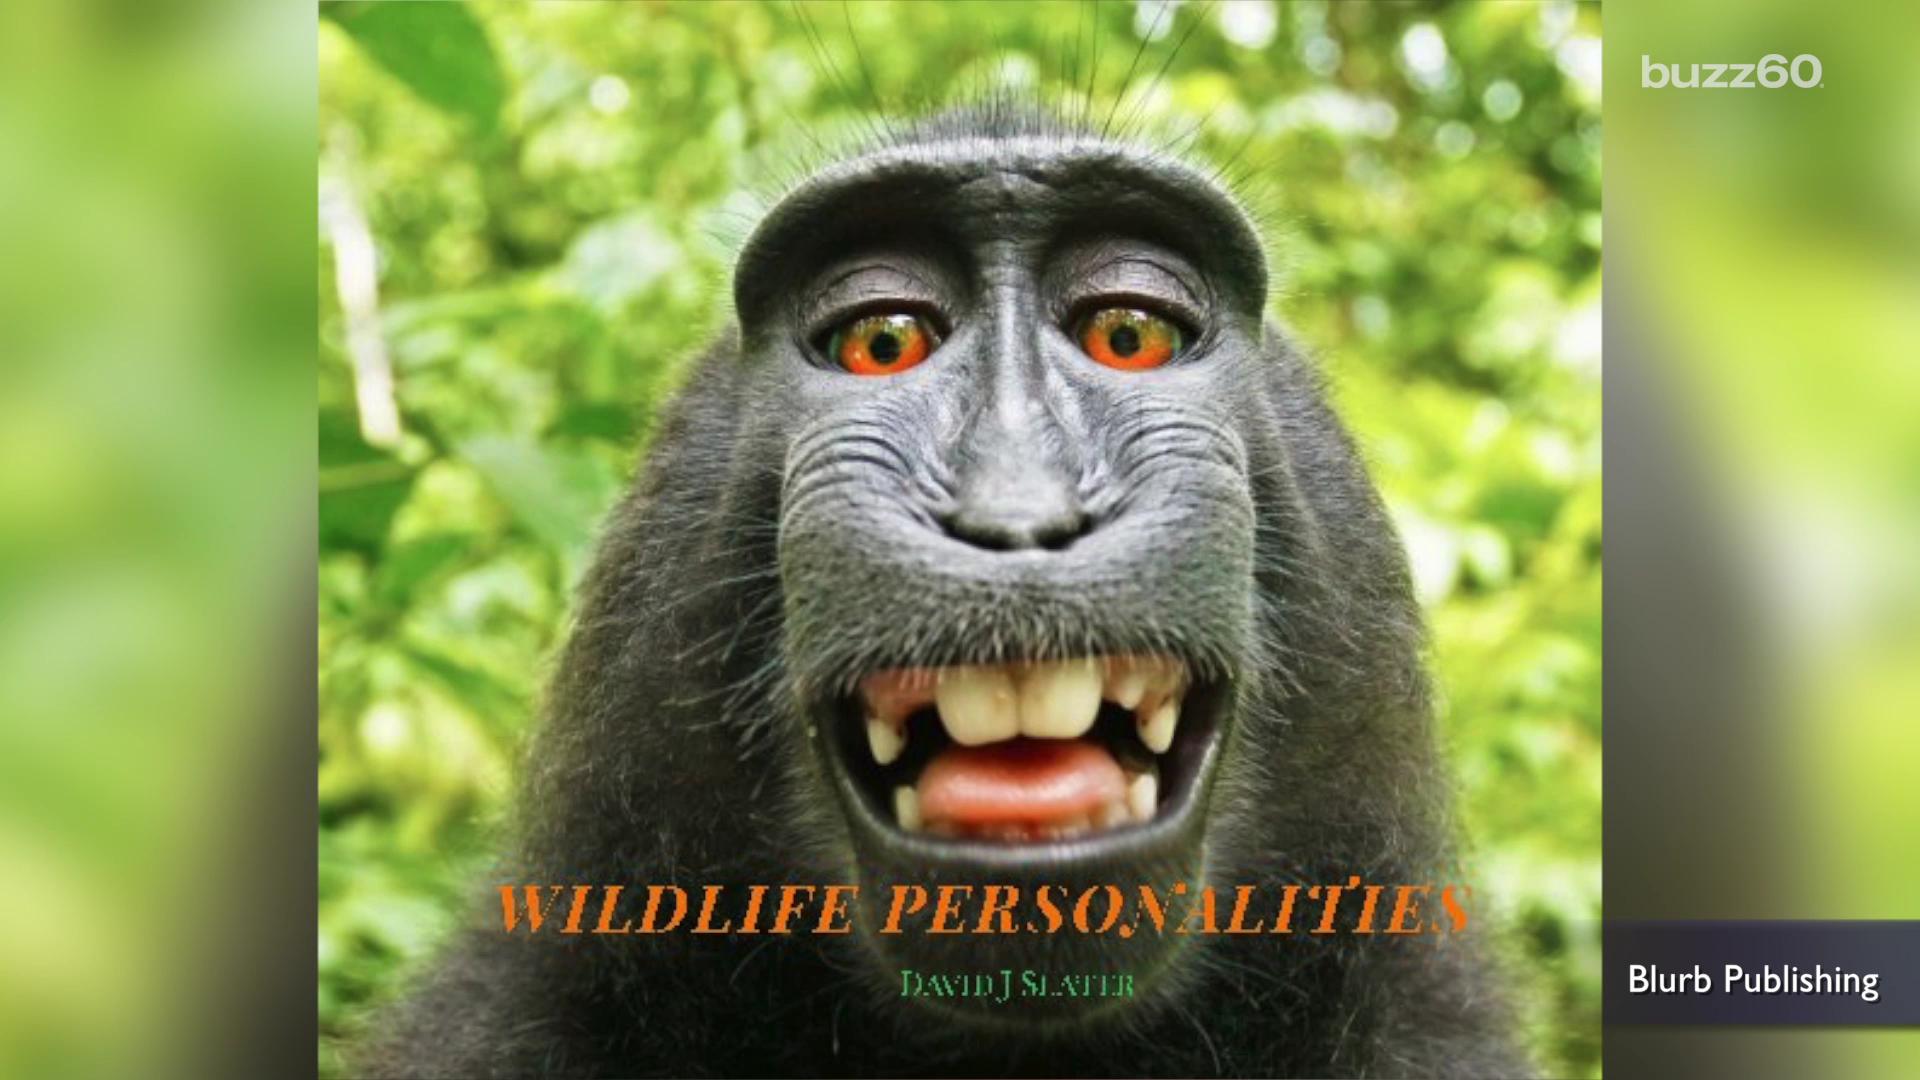 PETA sues to give monkey copyright ownership of selfie